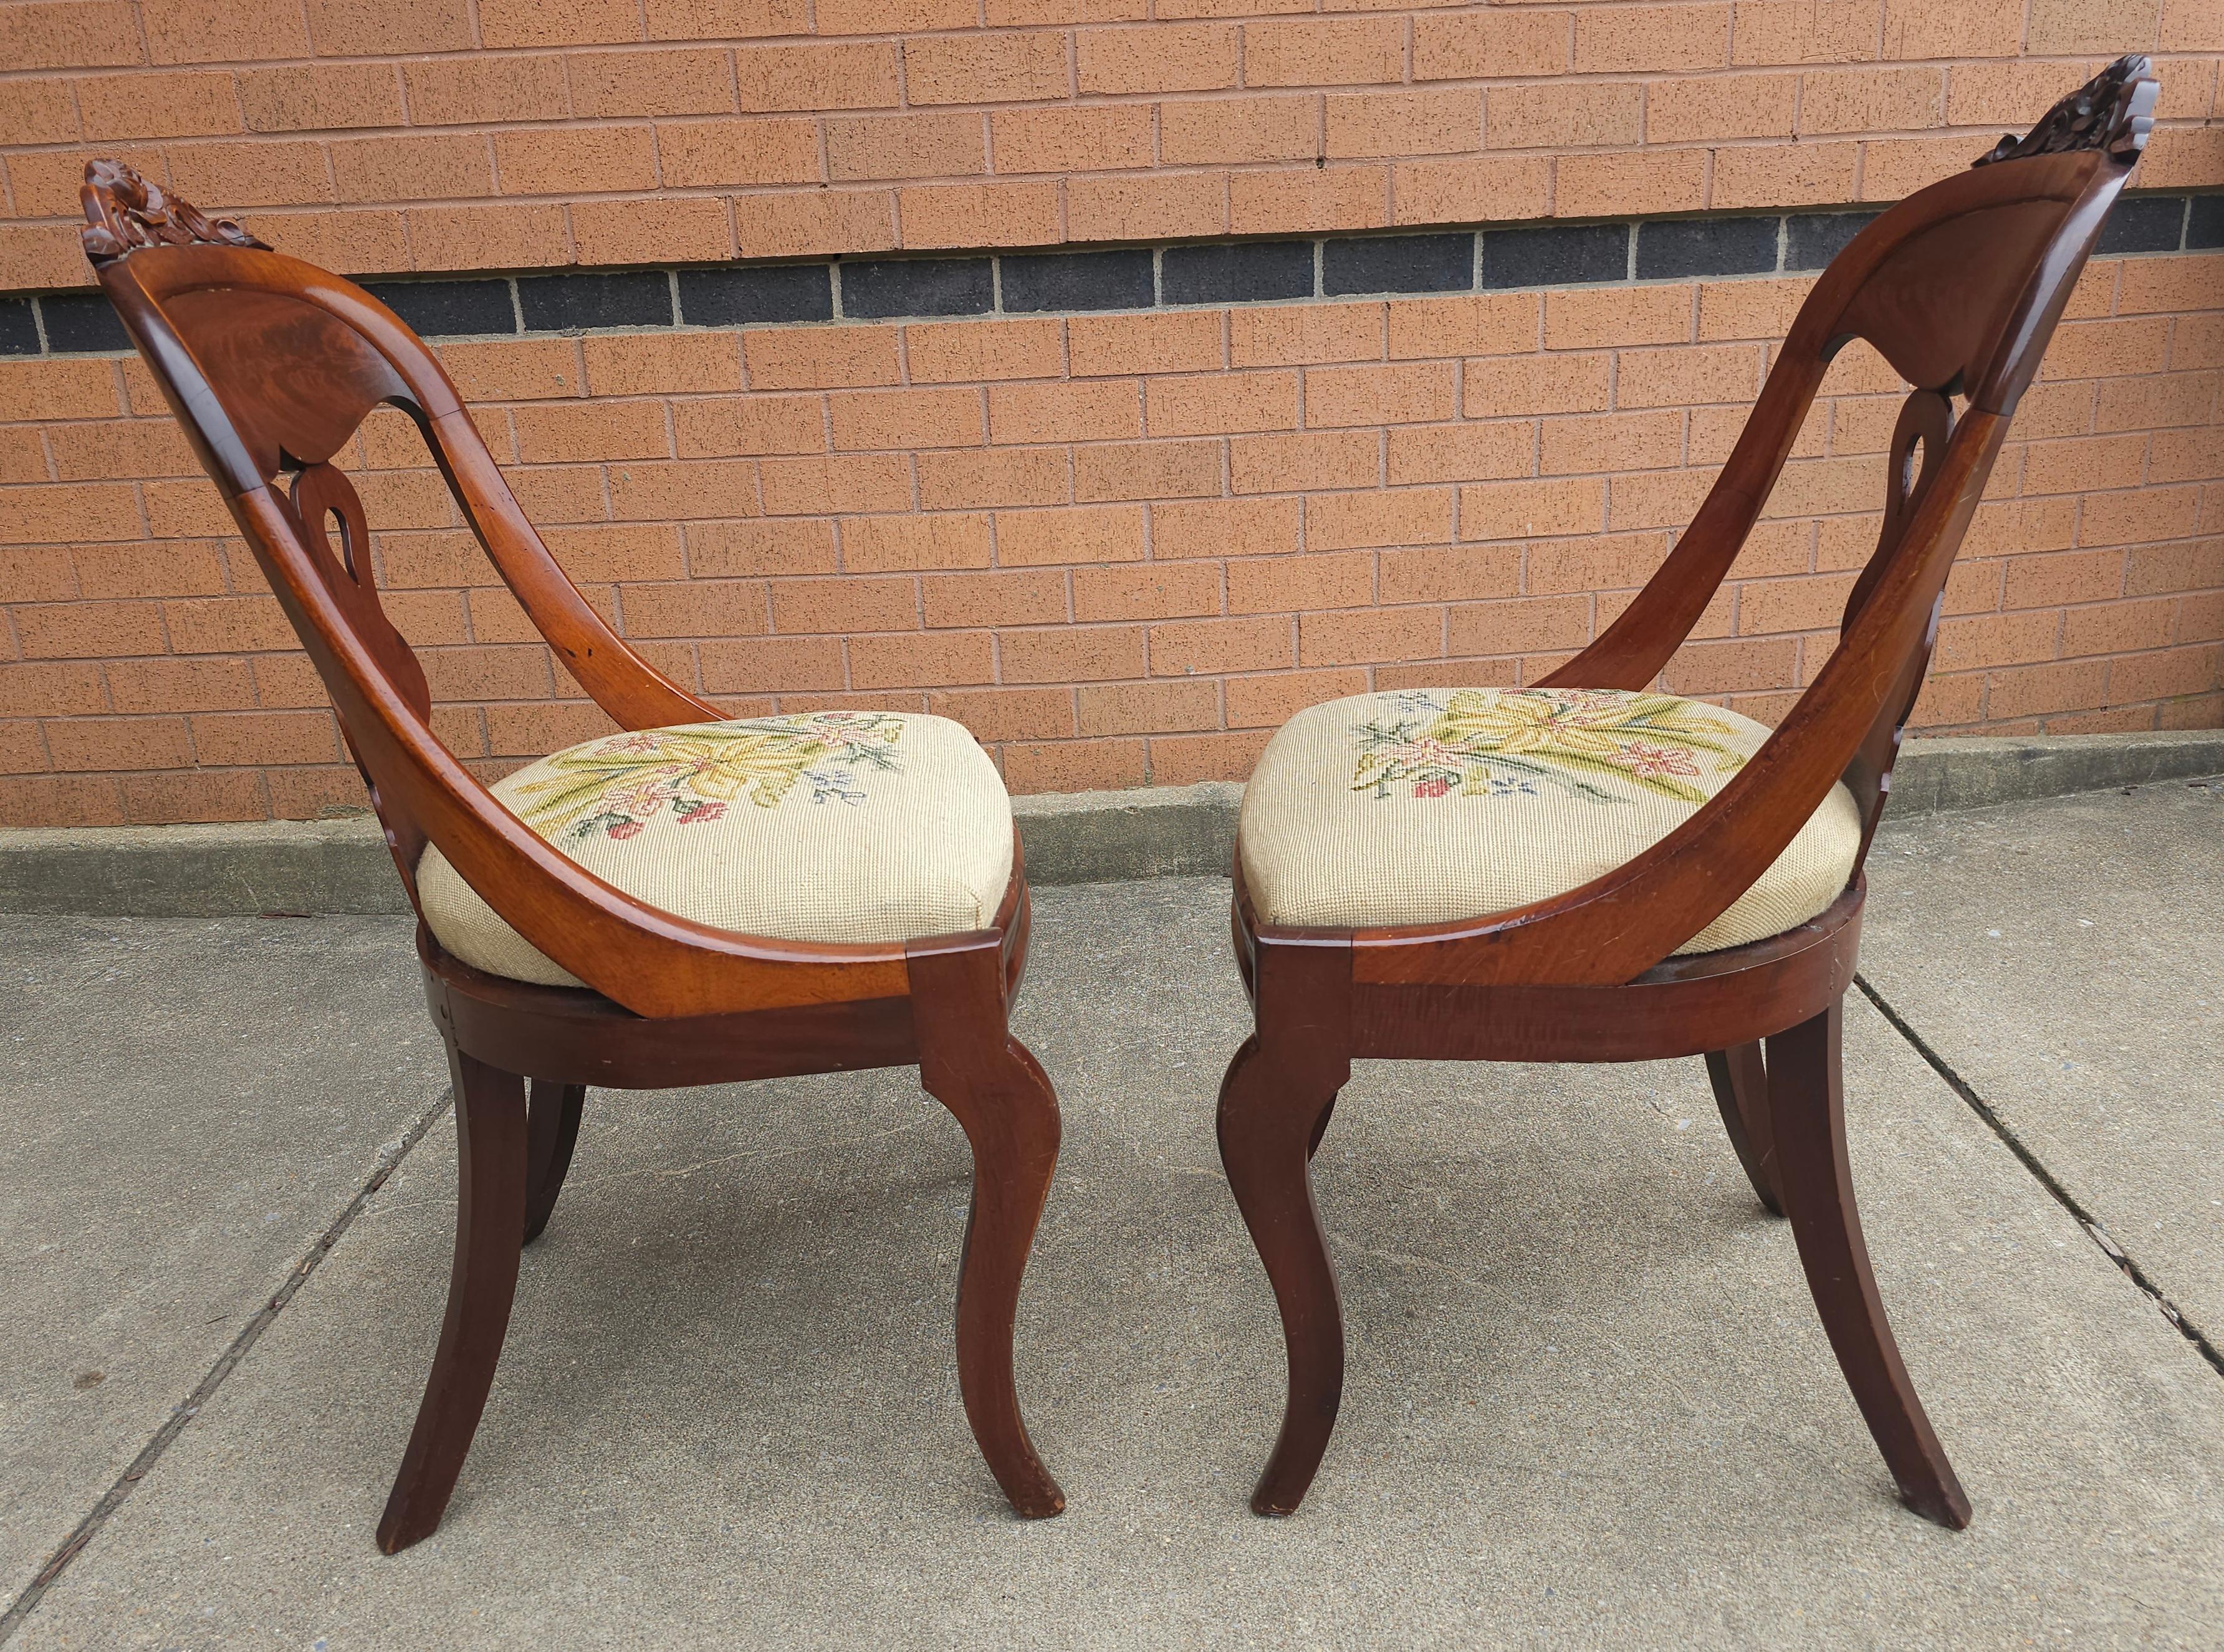 Upholstery Pair 19th C. American Empire Carved Magogany and Upholstered Chairs For Sale